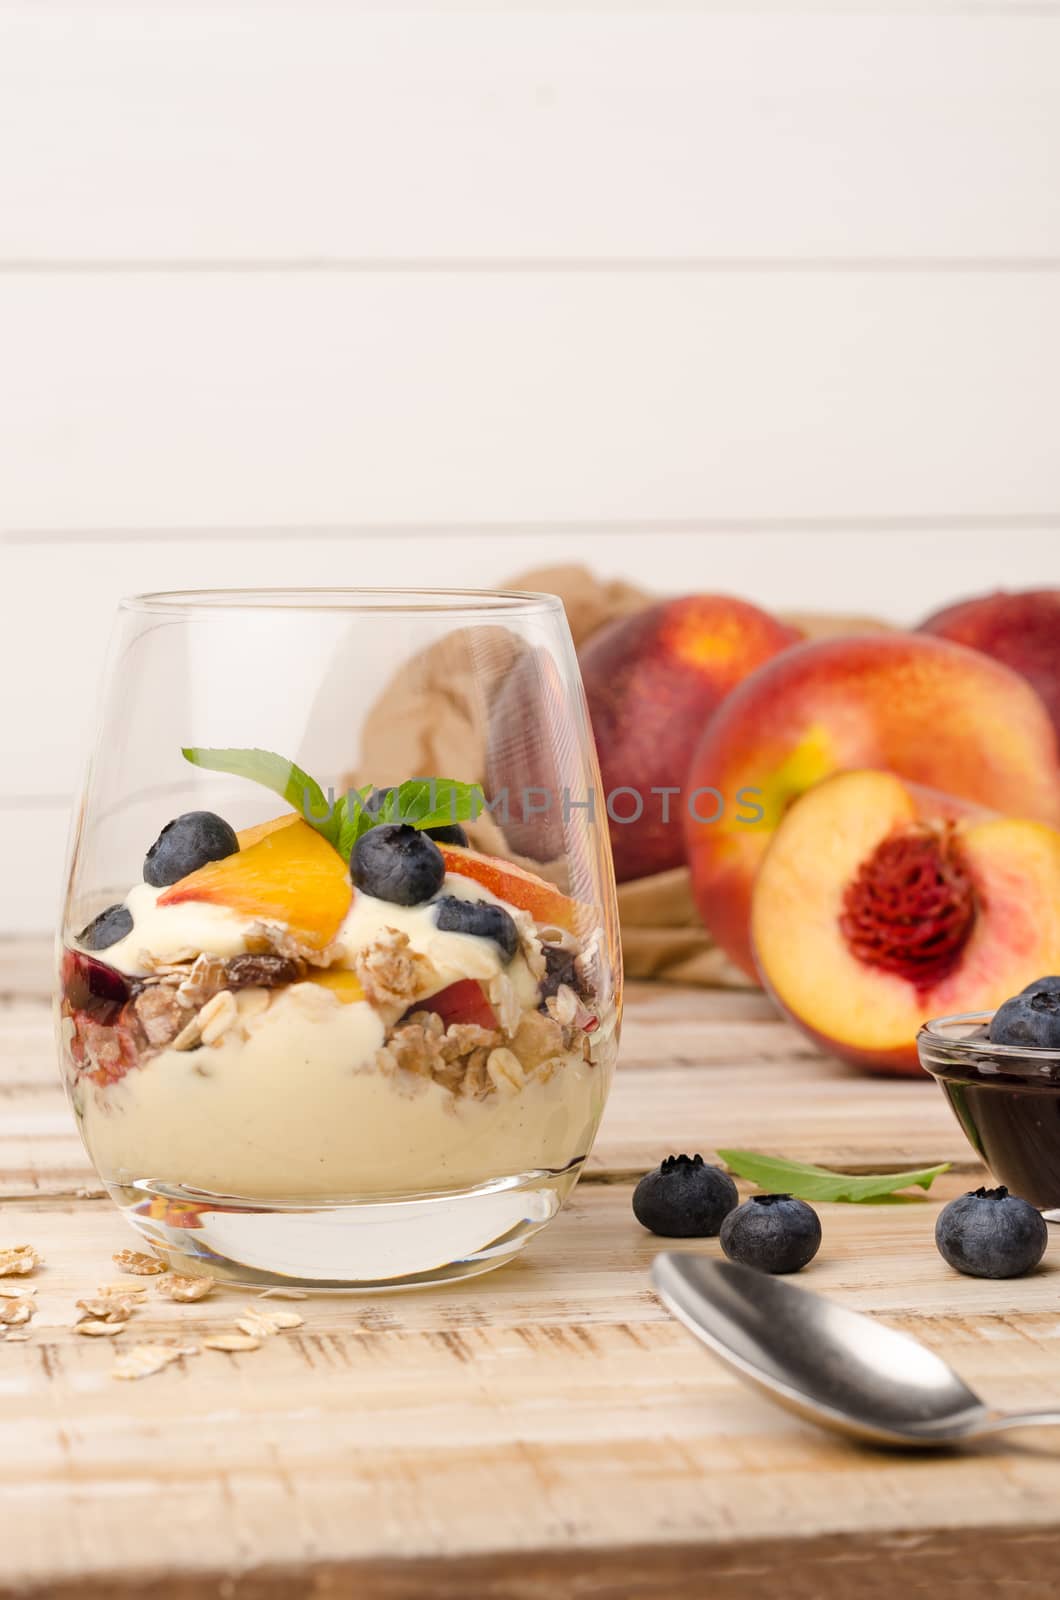 Granola with peaches, yogurt and blueberries by AnaMarques